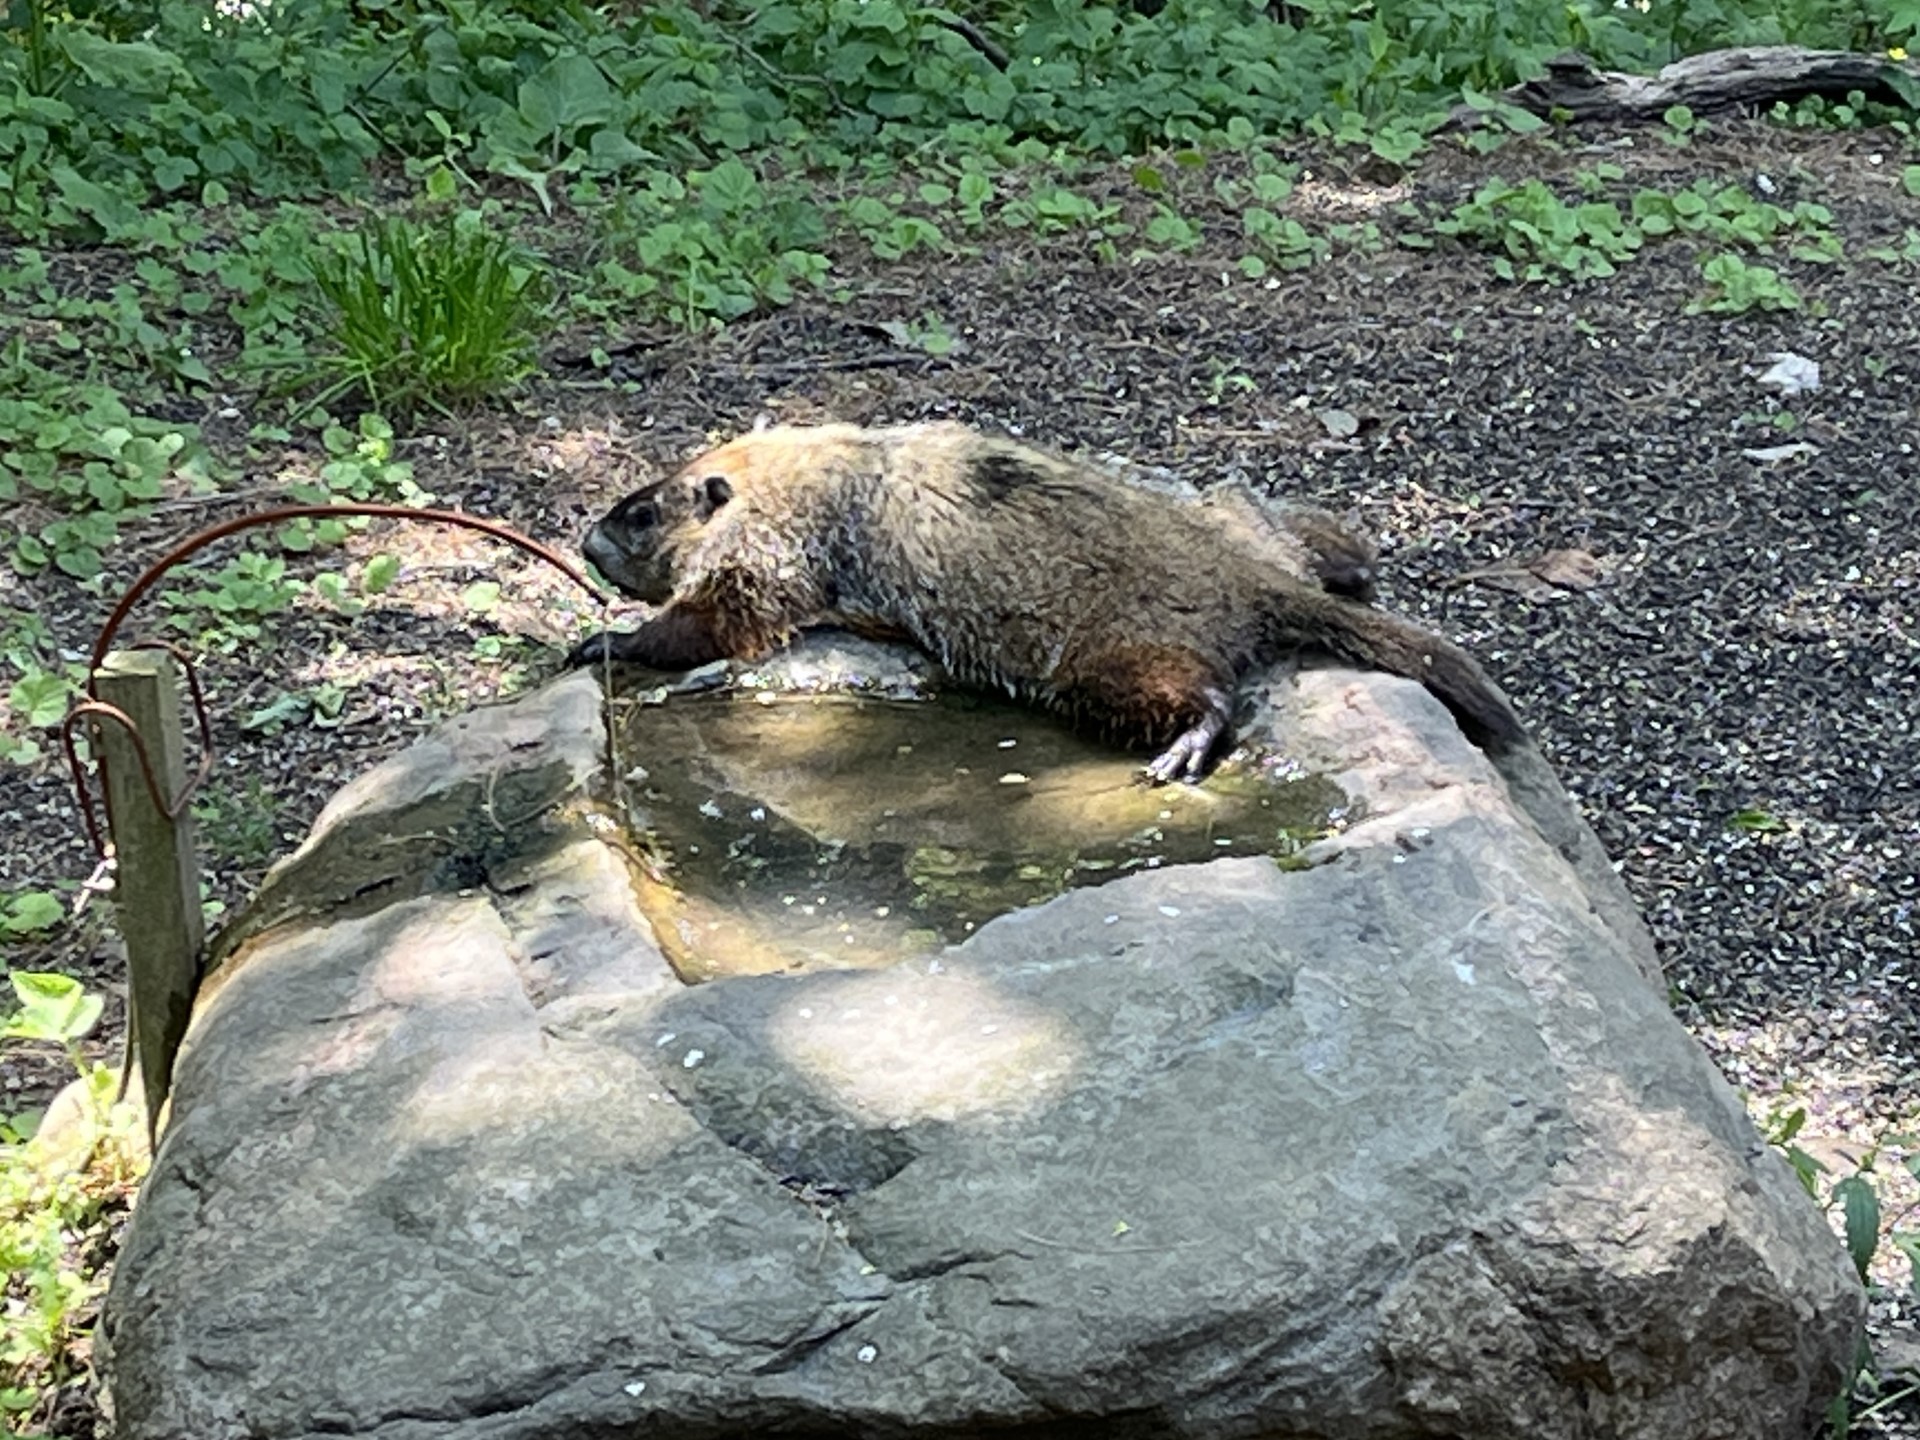 Woodchuck chilling out on the rock bath